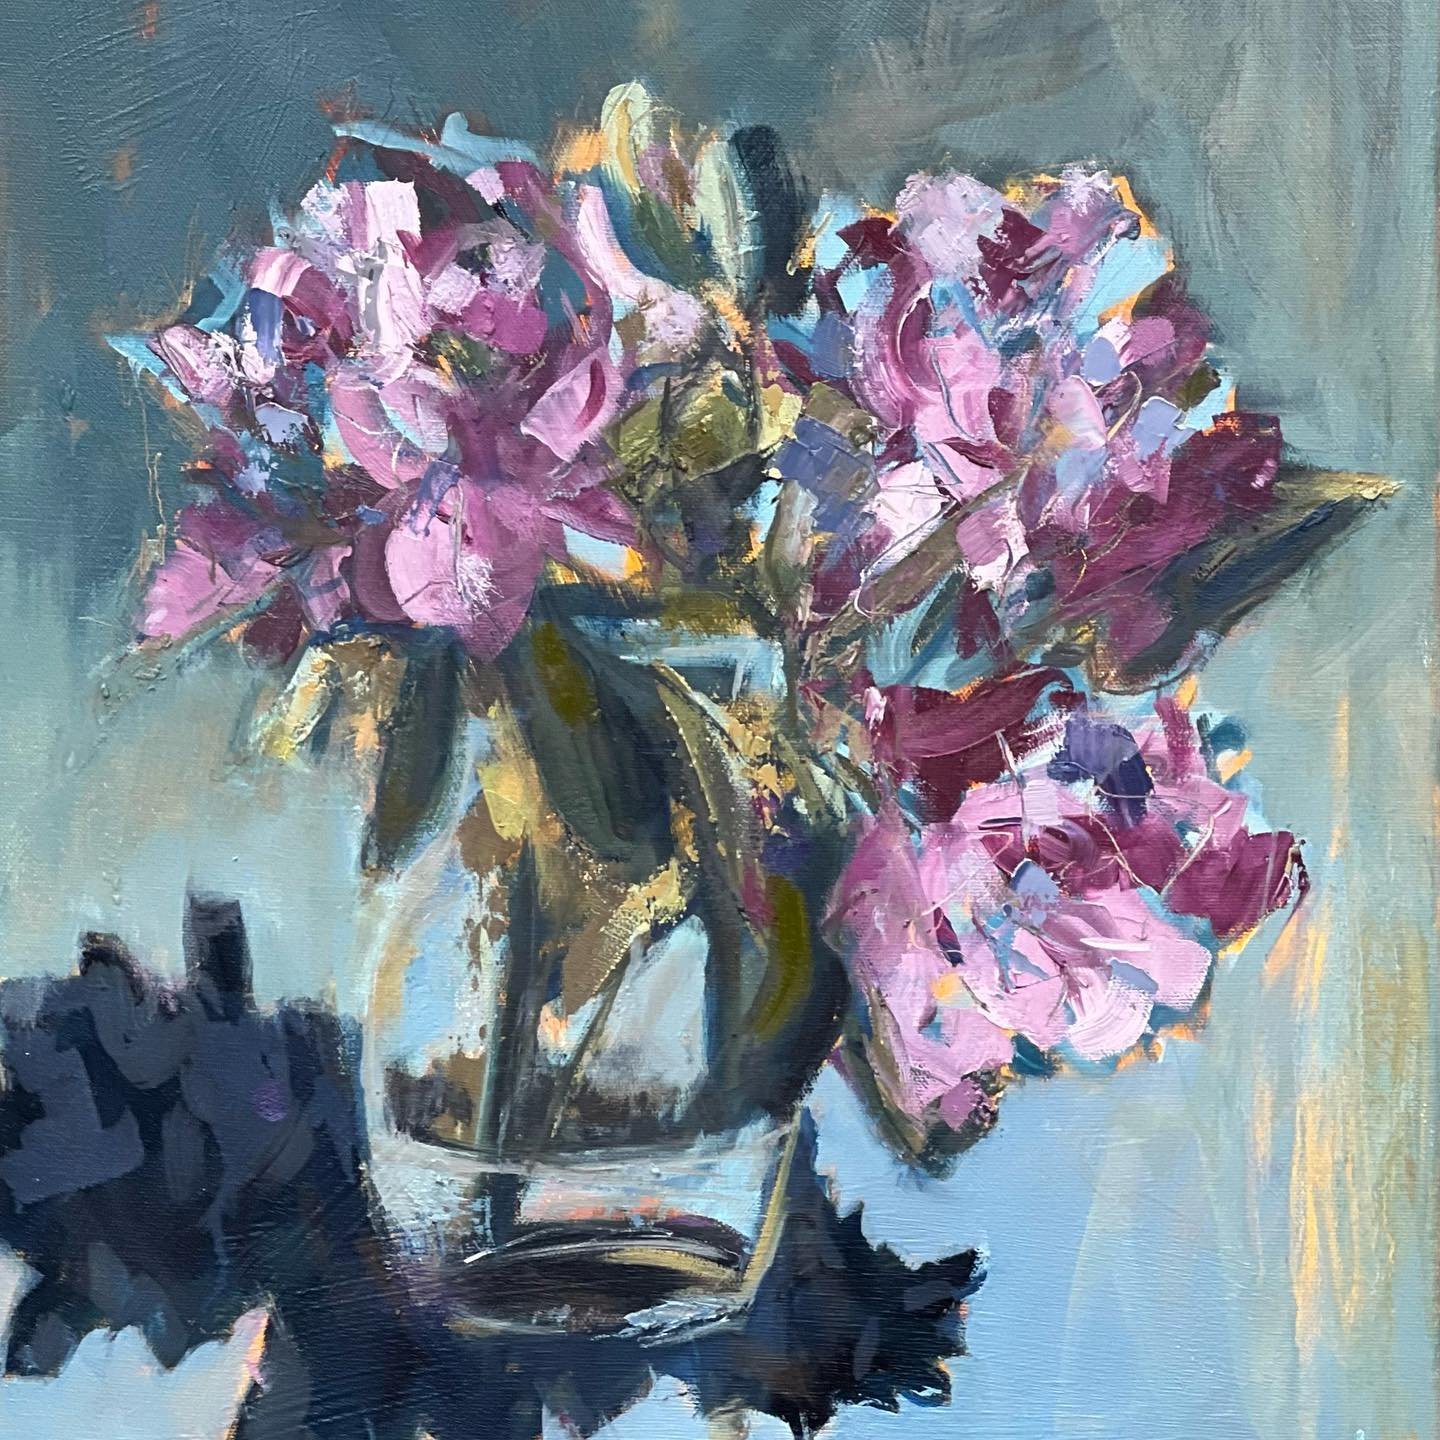 Our rhododendron bloomed this week, reminding me of this alla prima painting of it from a previous season. 💜

It&rsquo;s going to be a beautiful night for our First Friday @southendclt Gallery Crawl at @studioworksclt! Come see us 5-8pm, have a glas